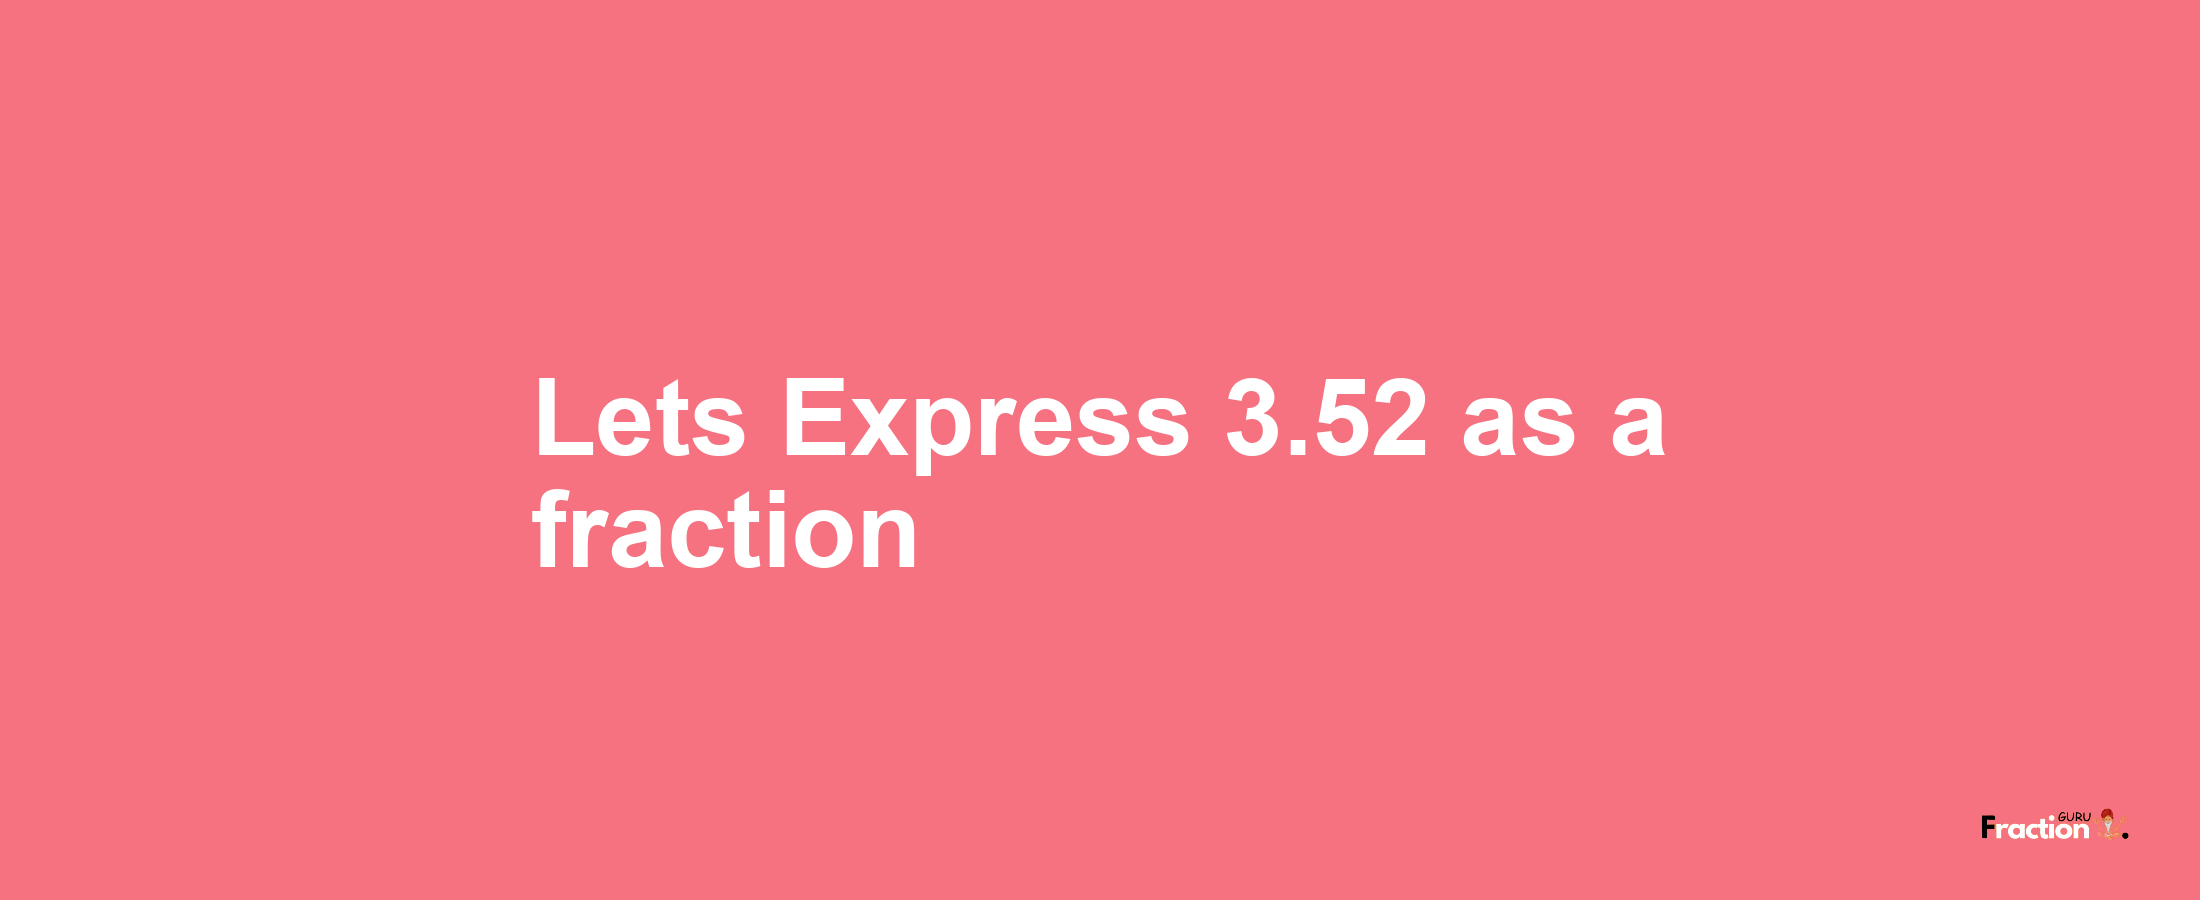 Lets Express 3.52 as afraction